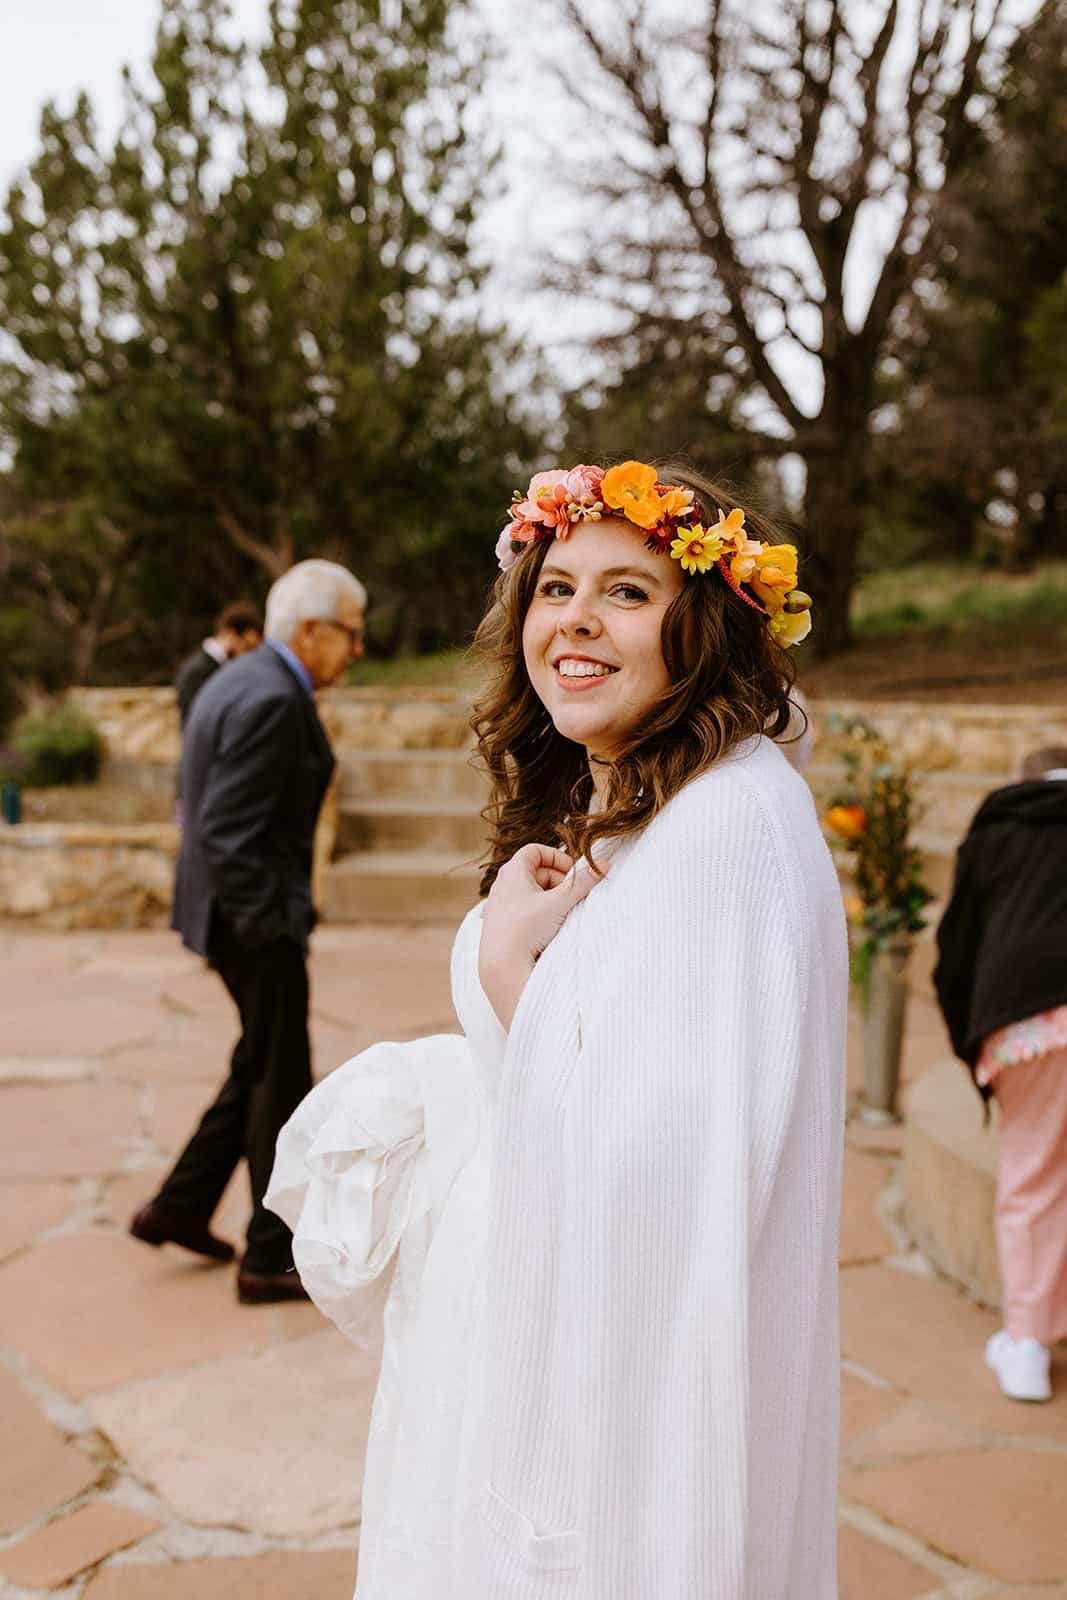 A woman in a wedding dress and flower crown smiles